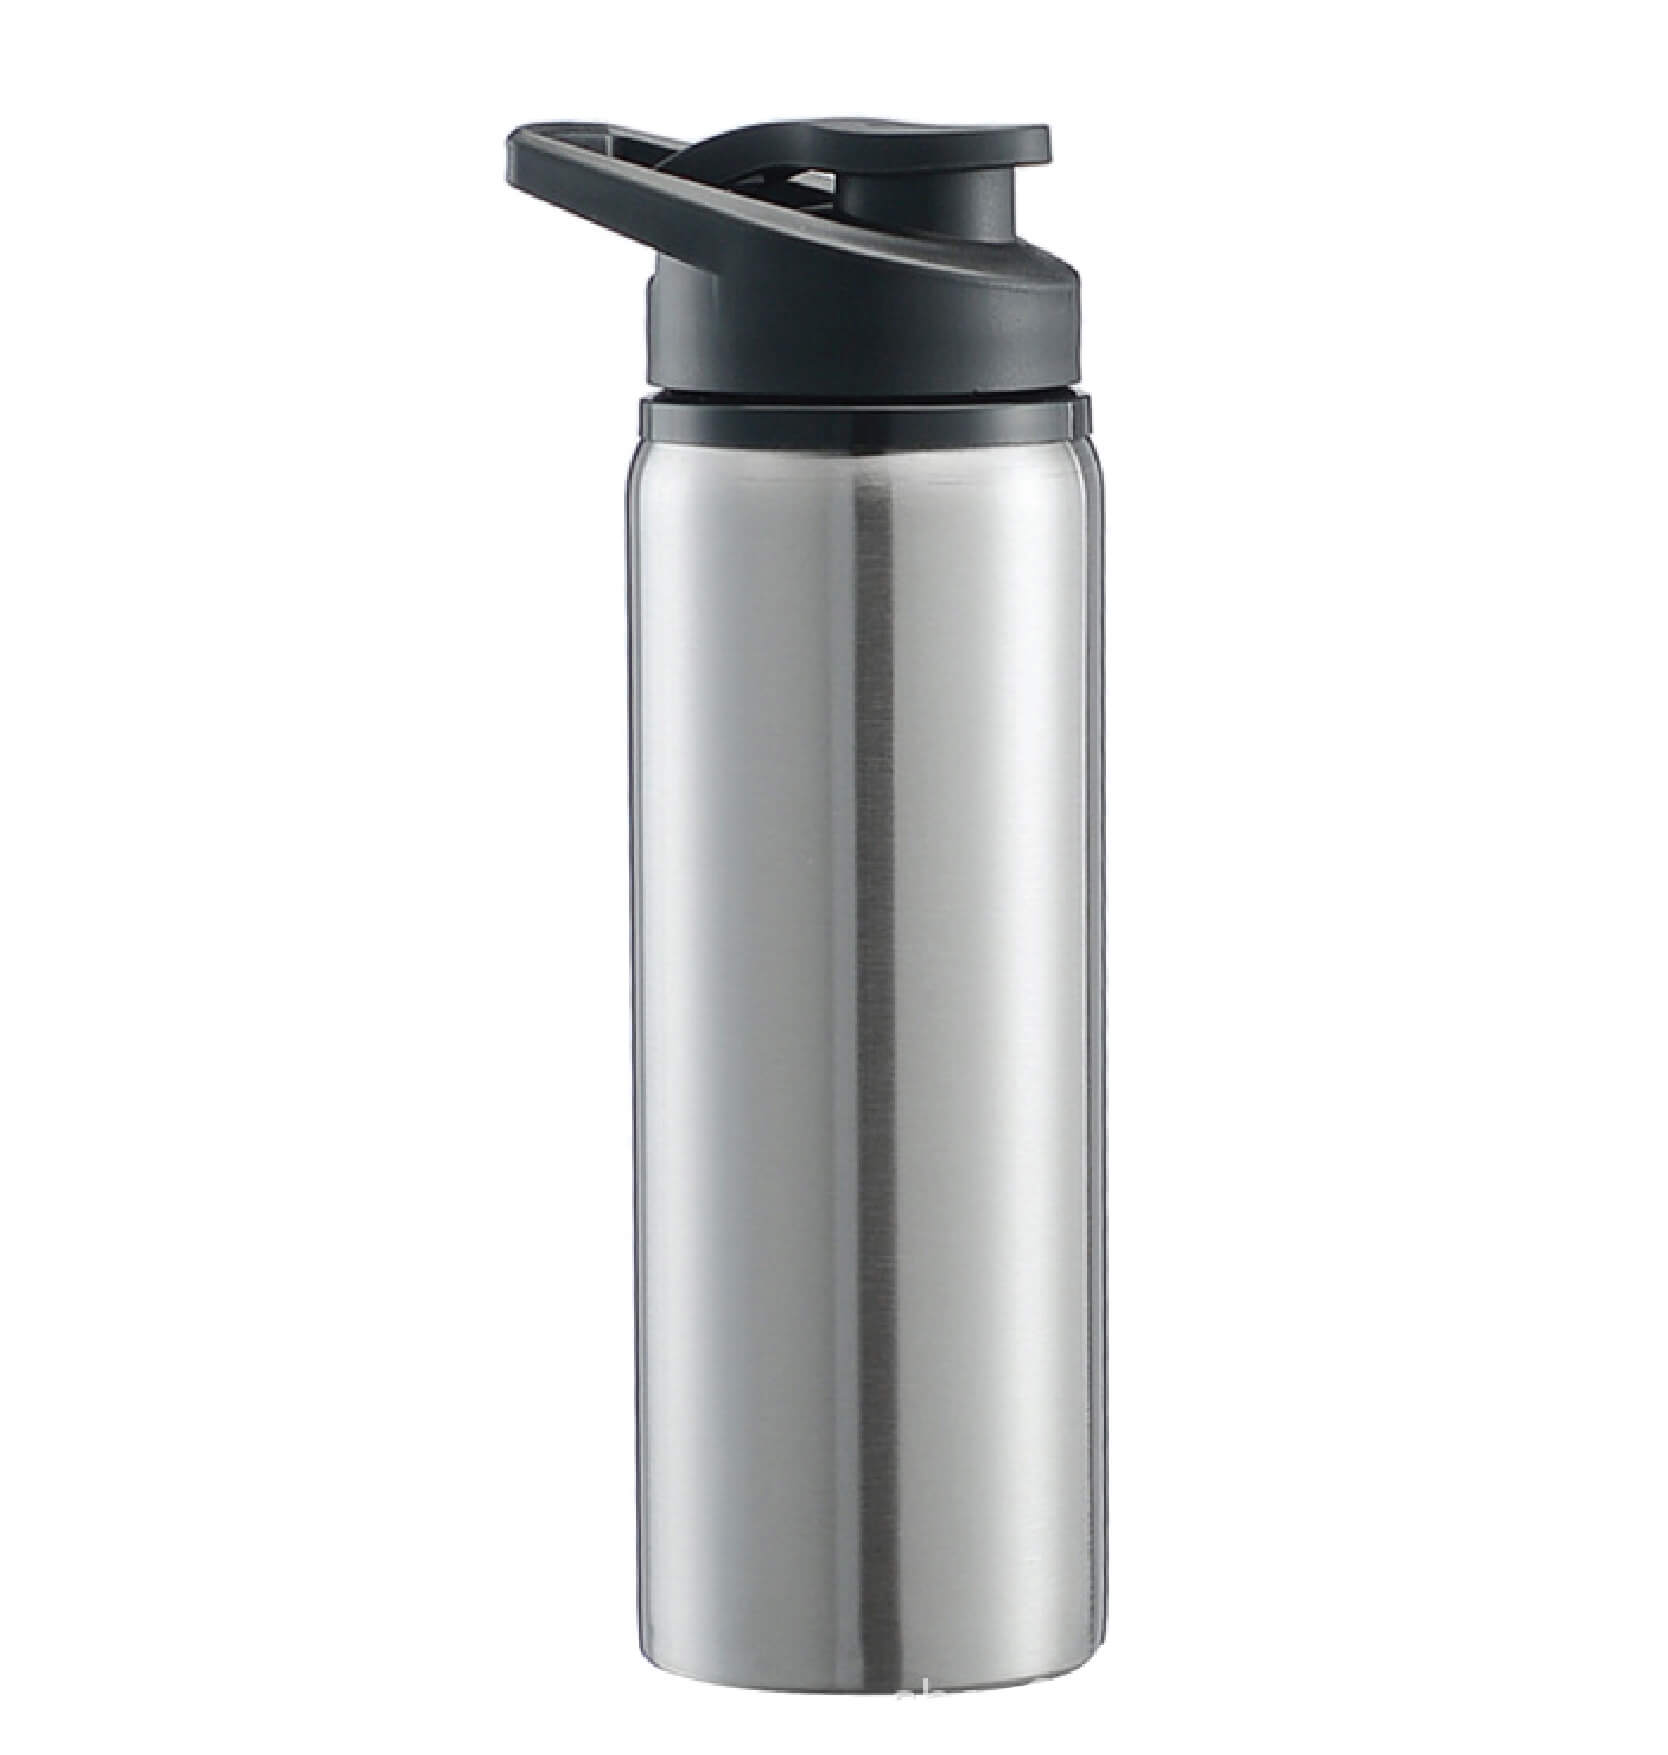 201 Single-layer stainless steel Flap cap mouth bottle